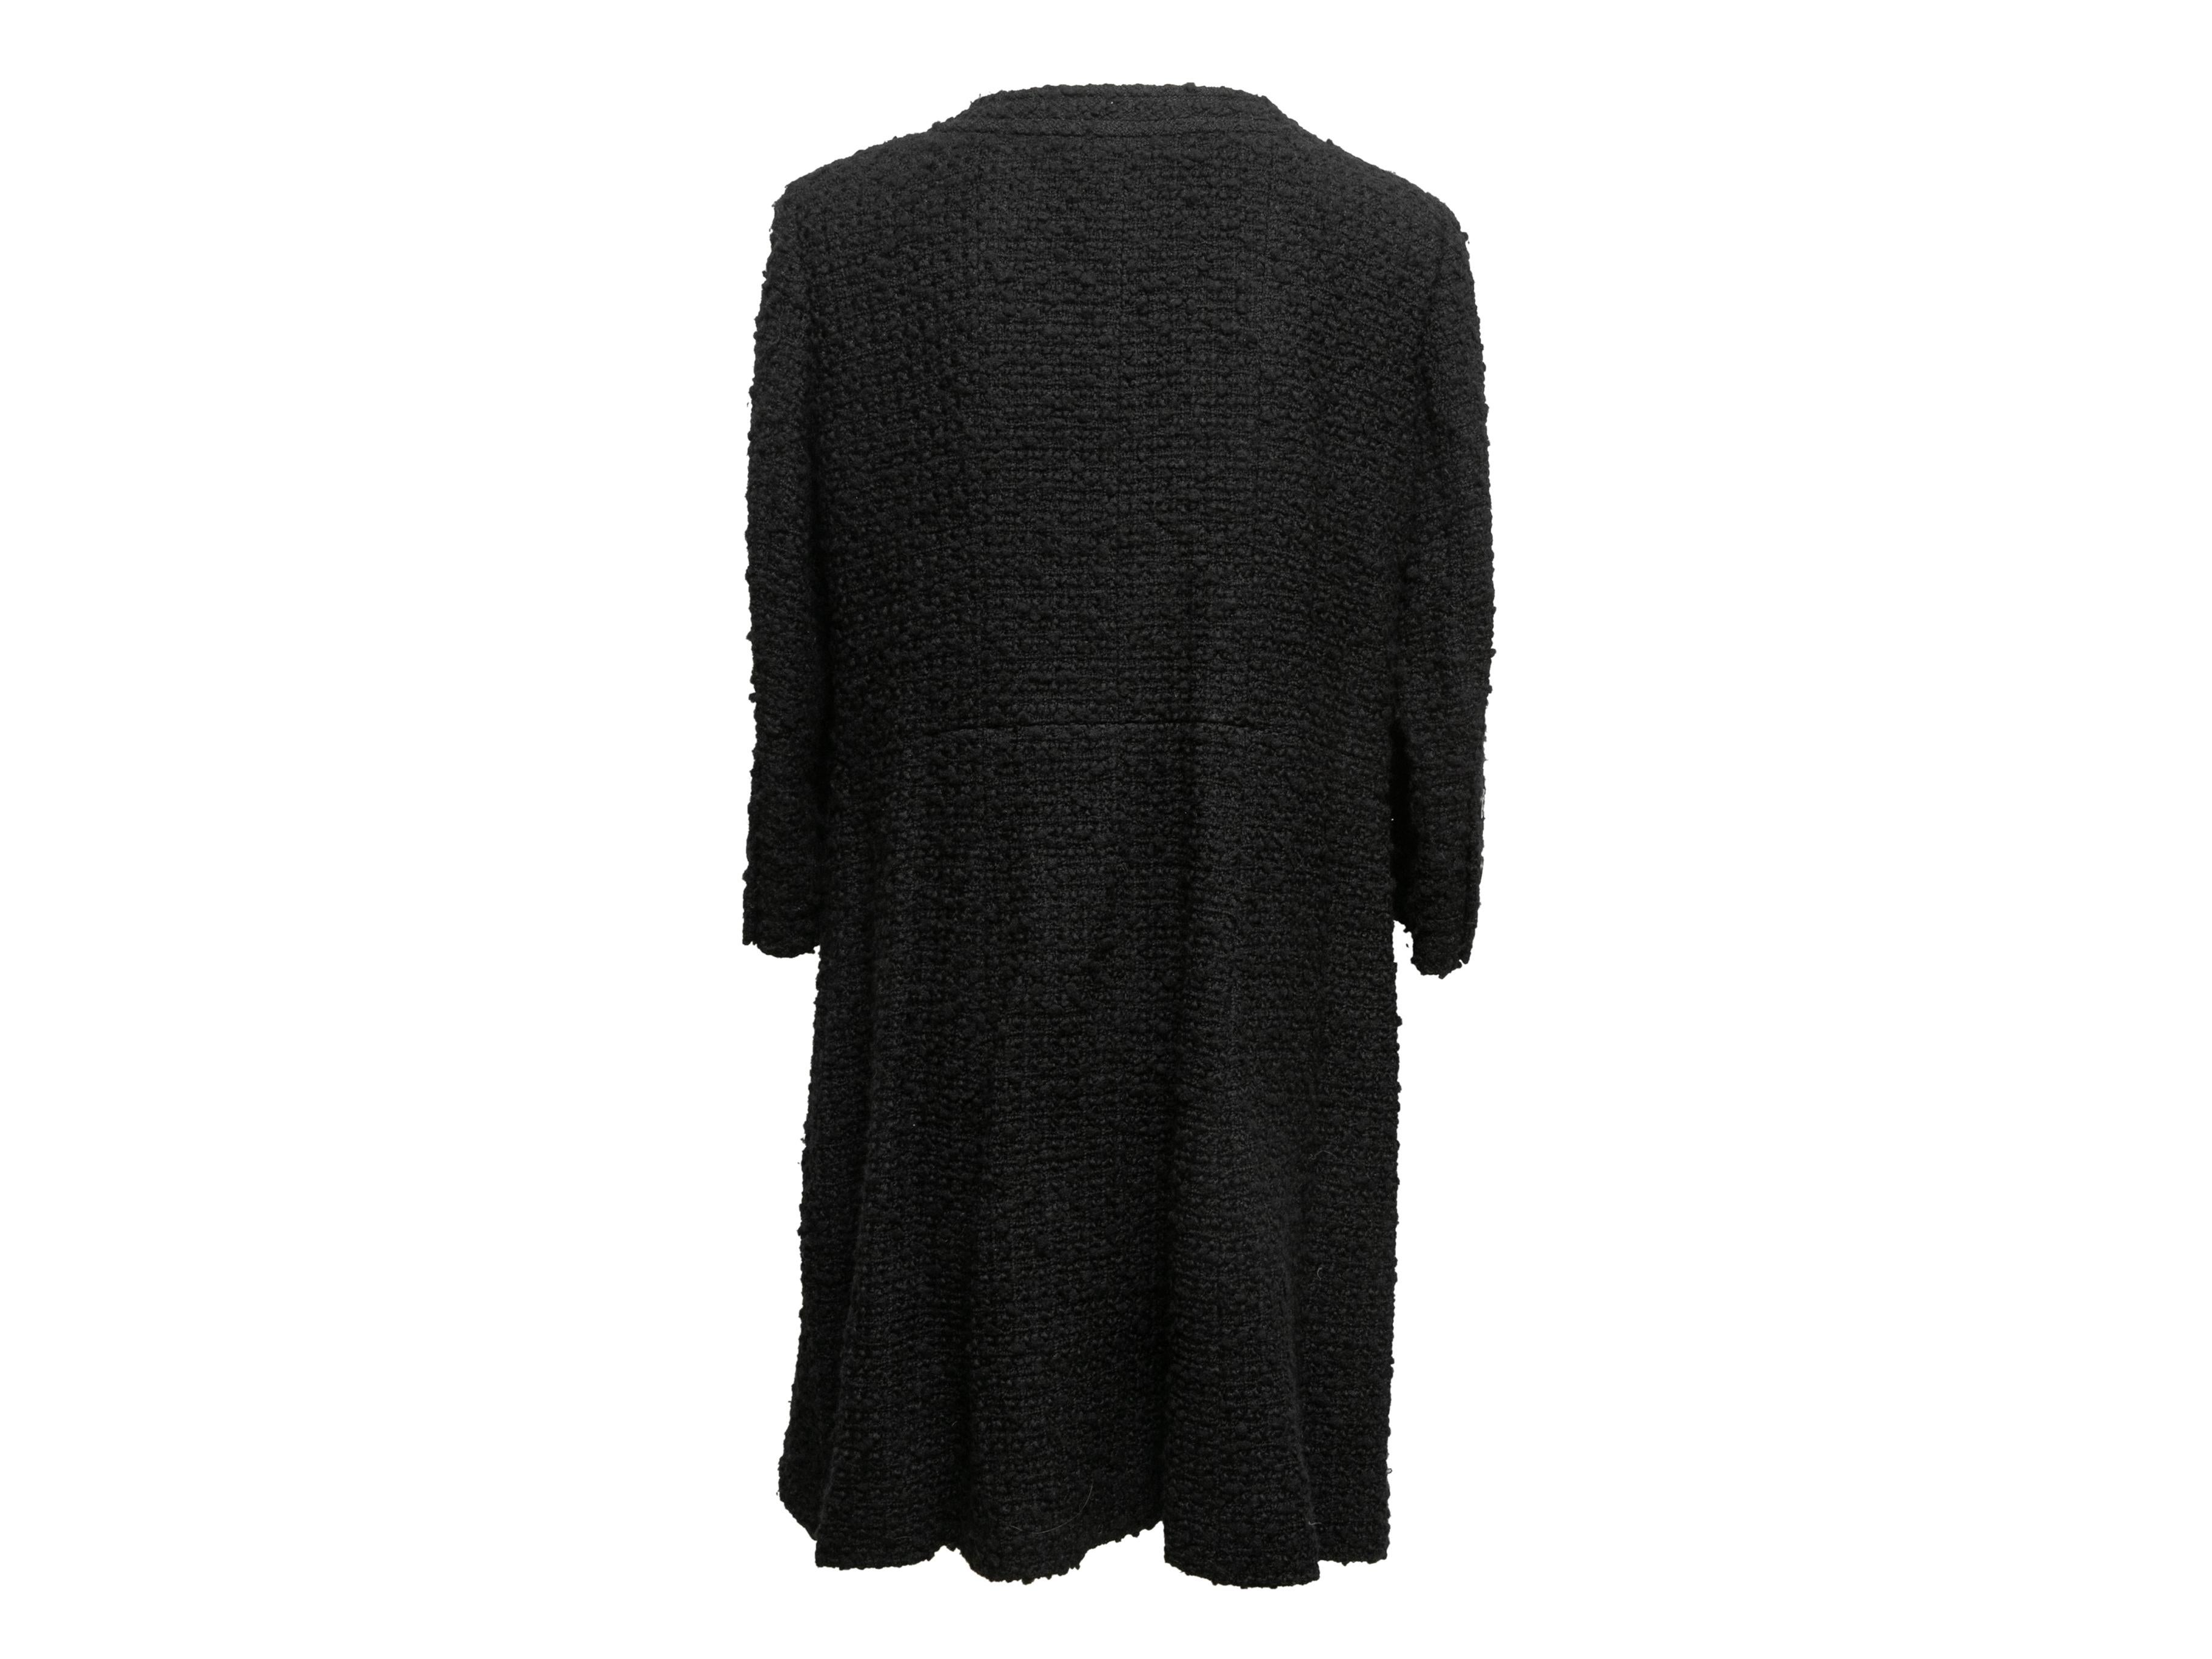 Black Chanel Boucle Wool Coat Size FR 50 In Good Condition For Sale In New York, NY